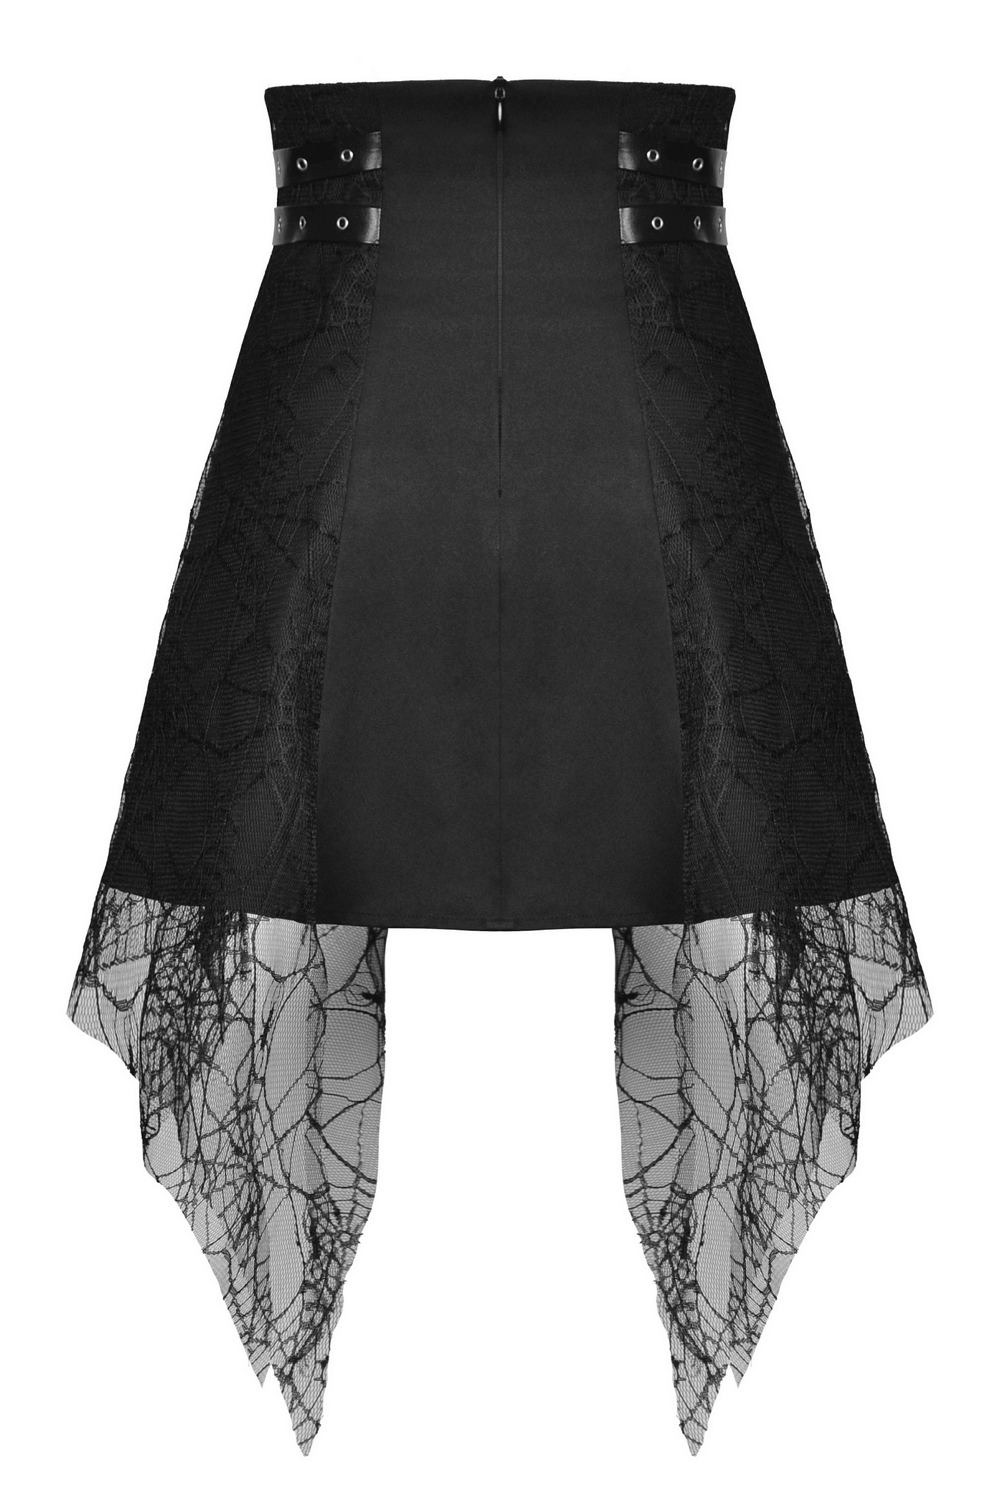 Punk Goth Lace Spiderweb Mini Skirt with Cross and Lace